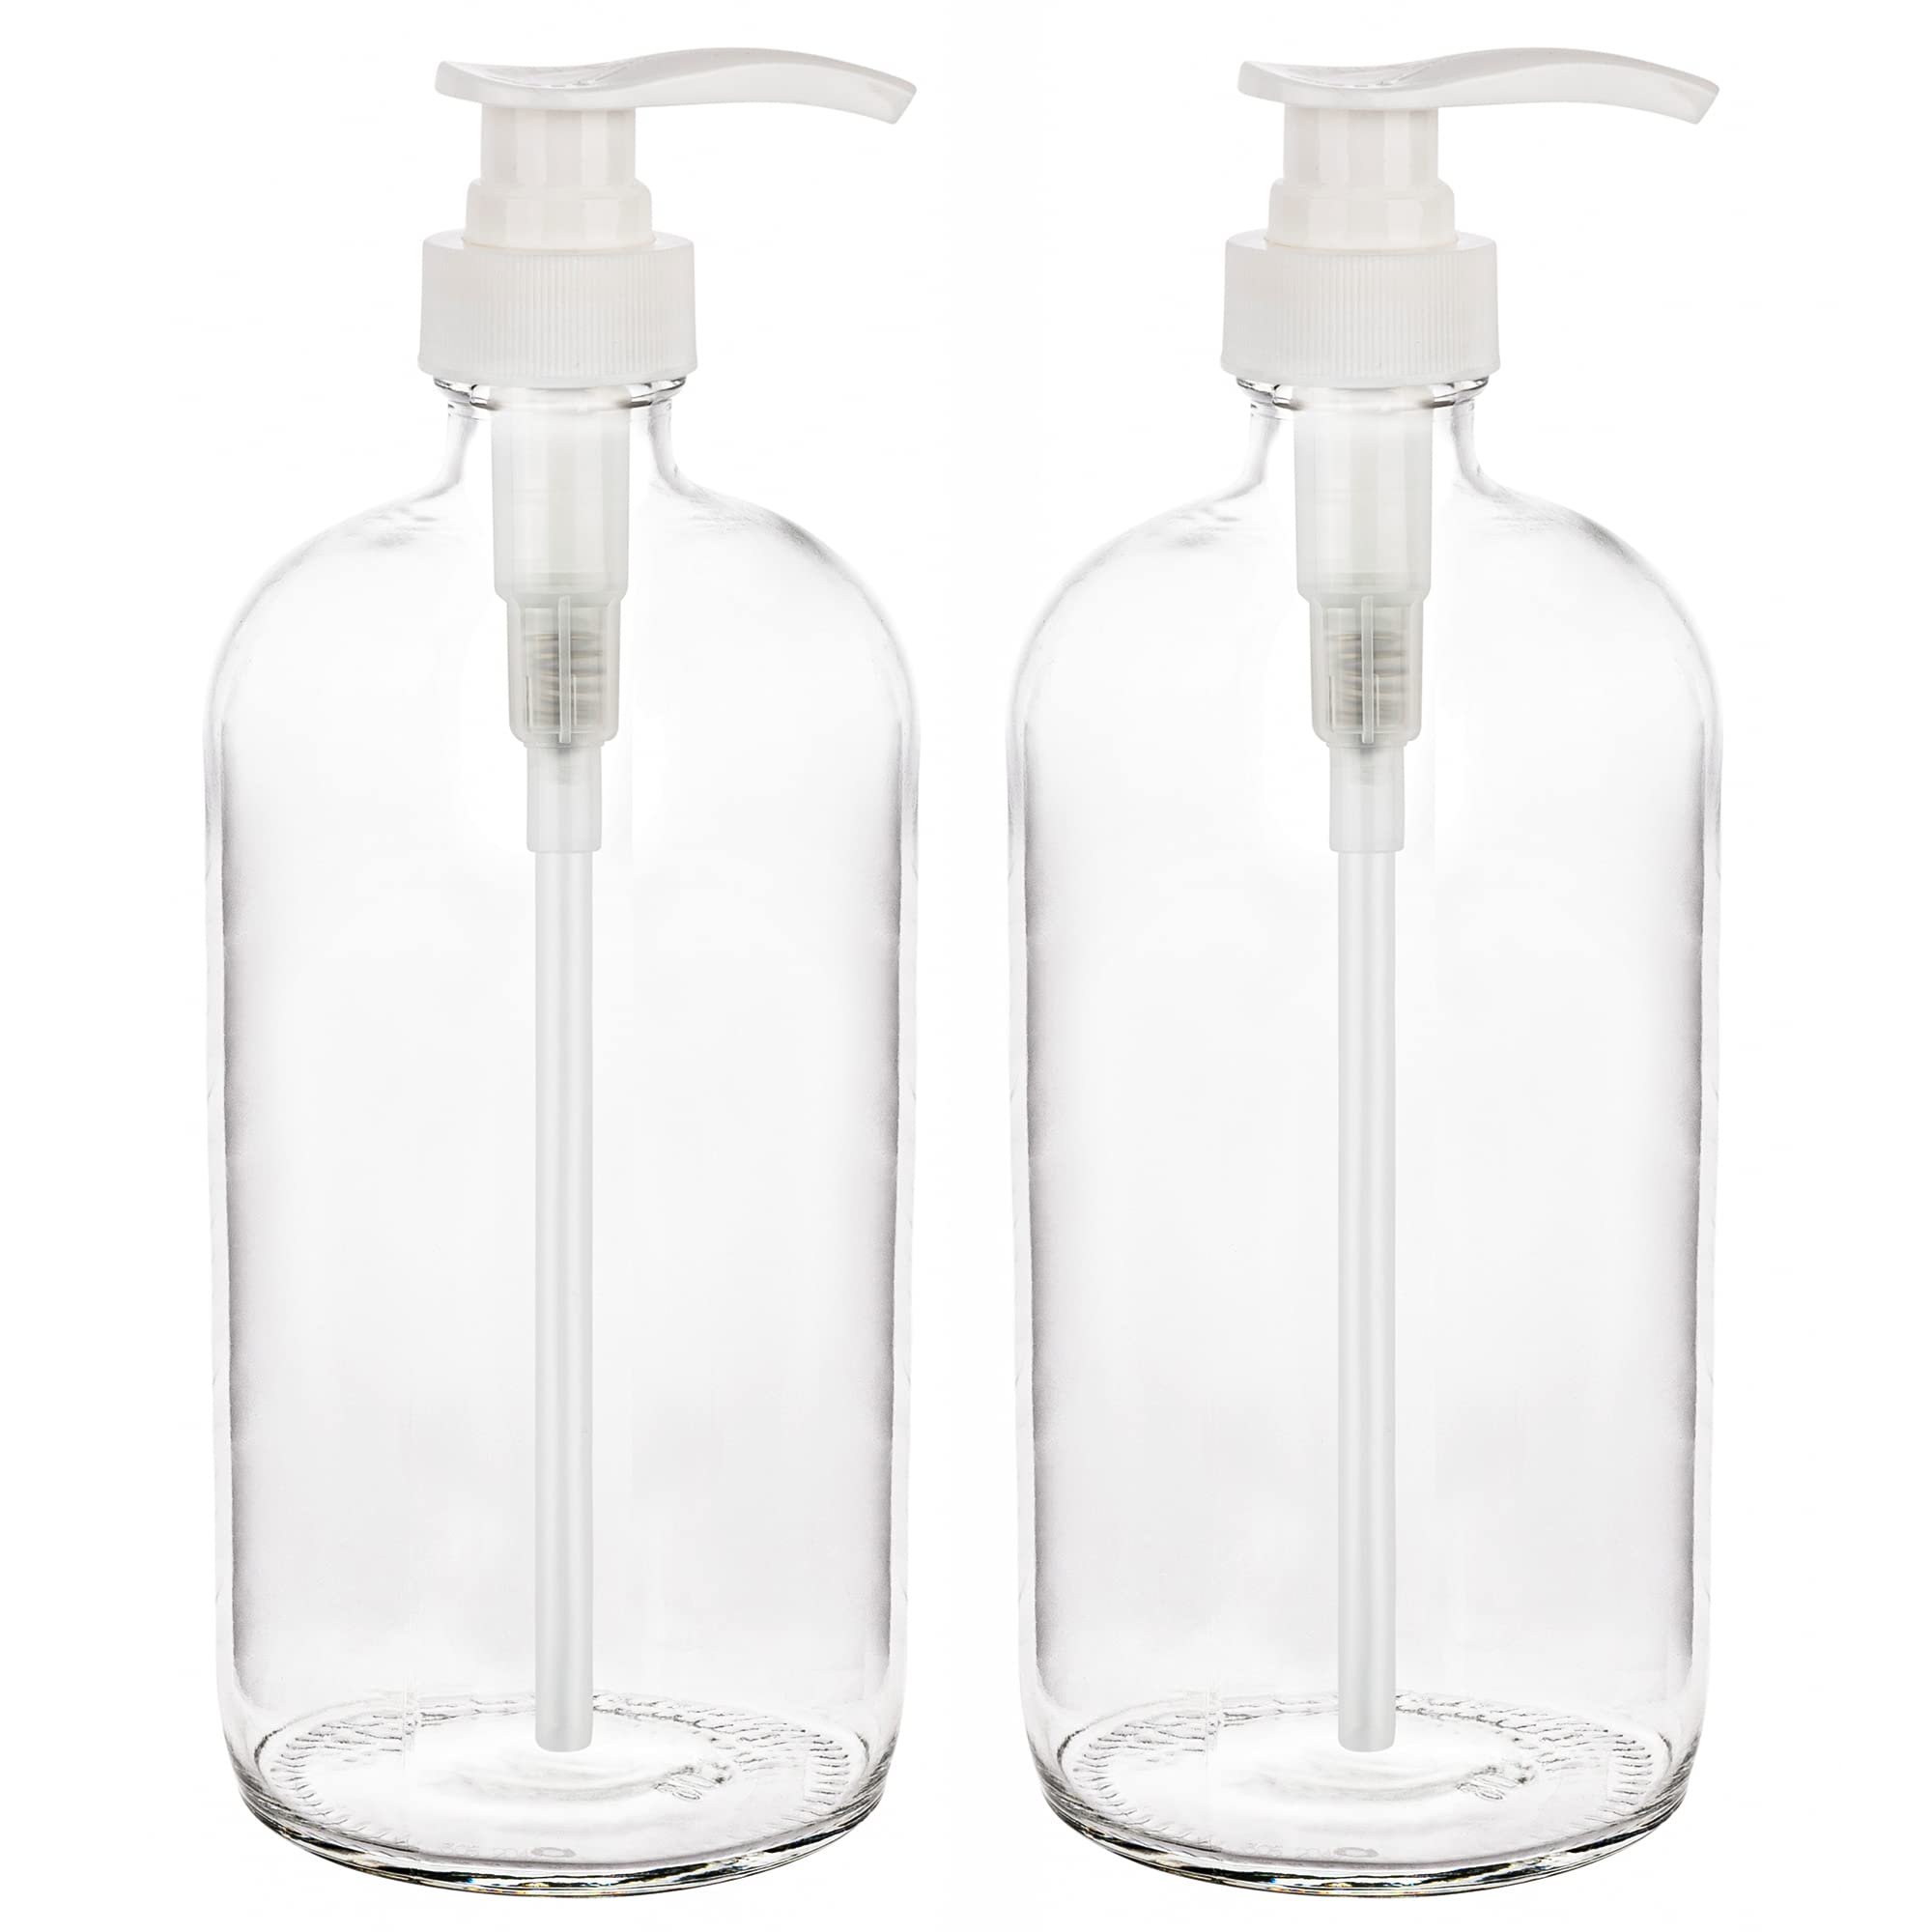 kitchentoolz 32-Ounce Large Clear Glass Boston Round Bottles w/Pumps. Great for Lotions, Soaps,Oils, Sauces - Food Safe and Medical Grade  - Like New